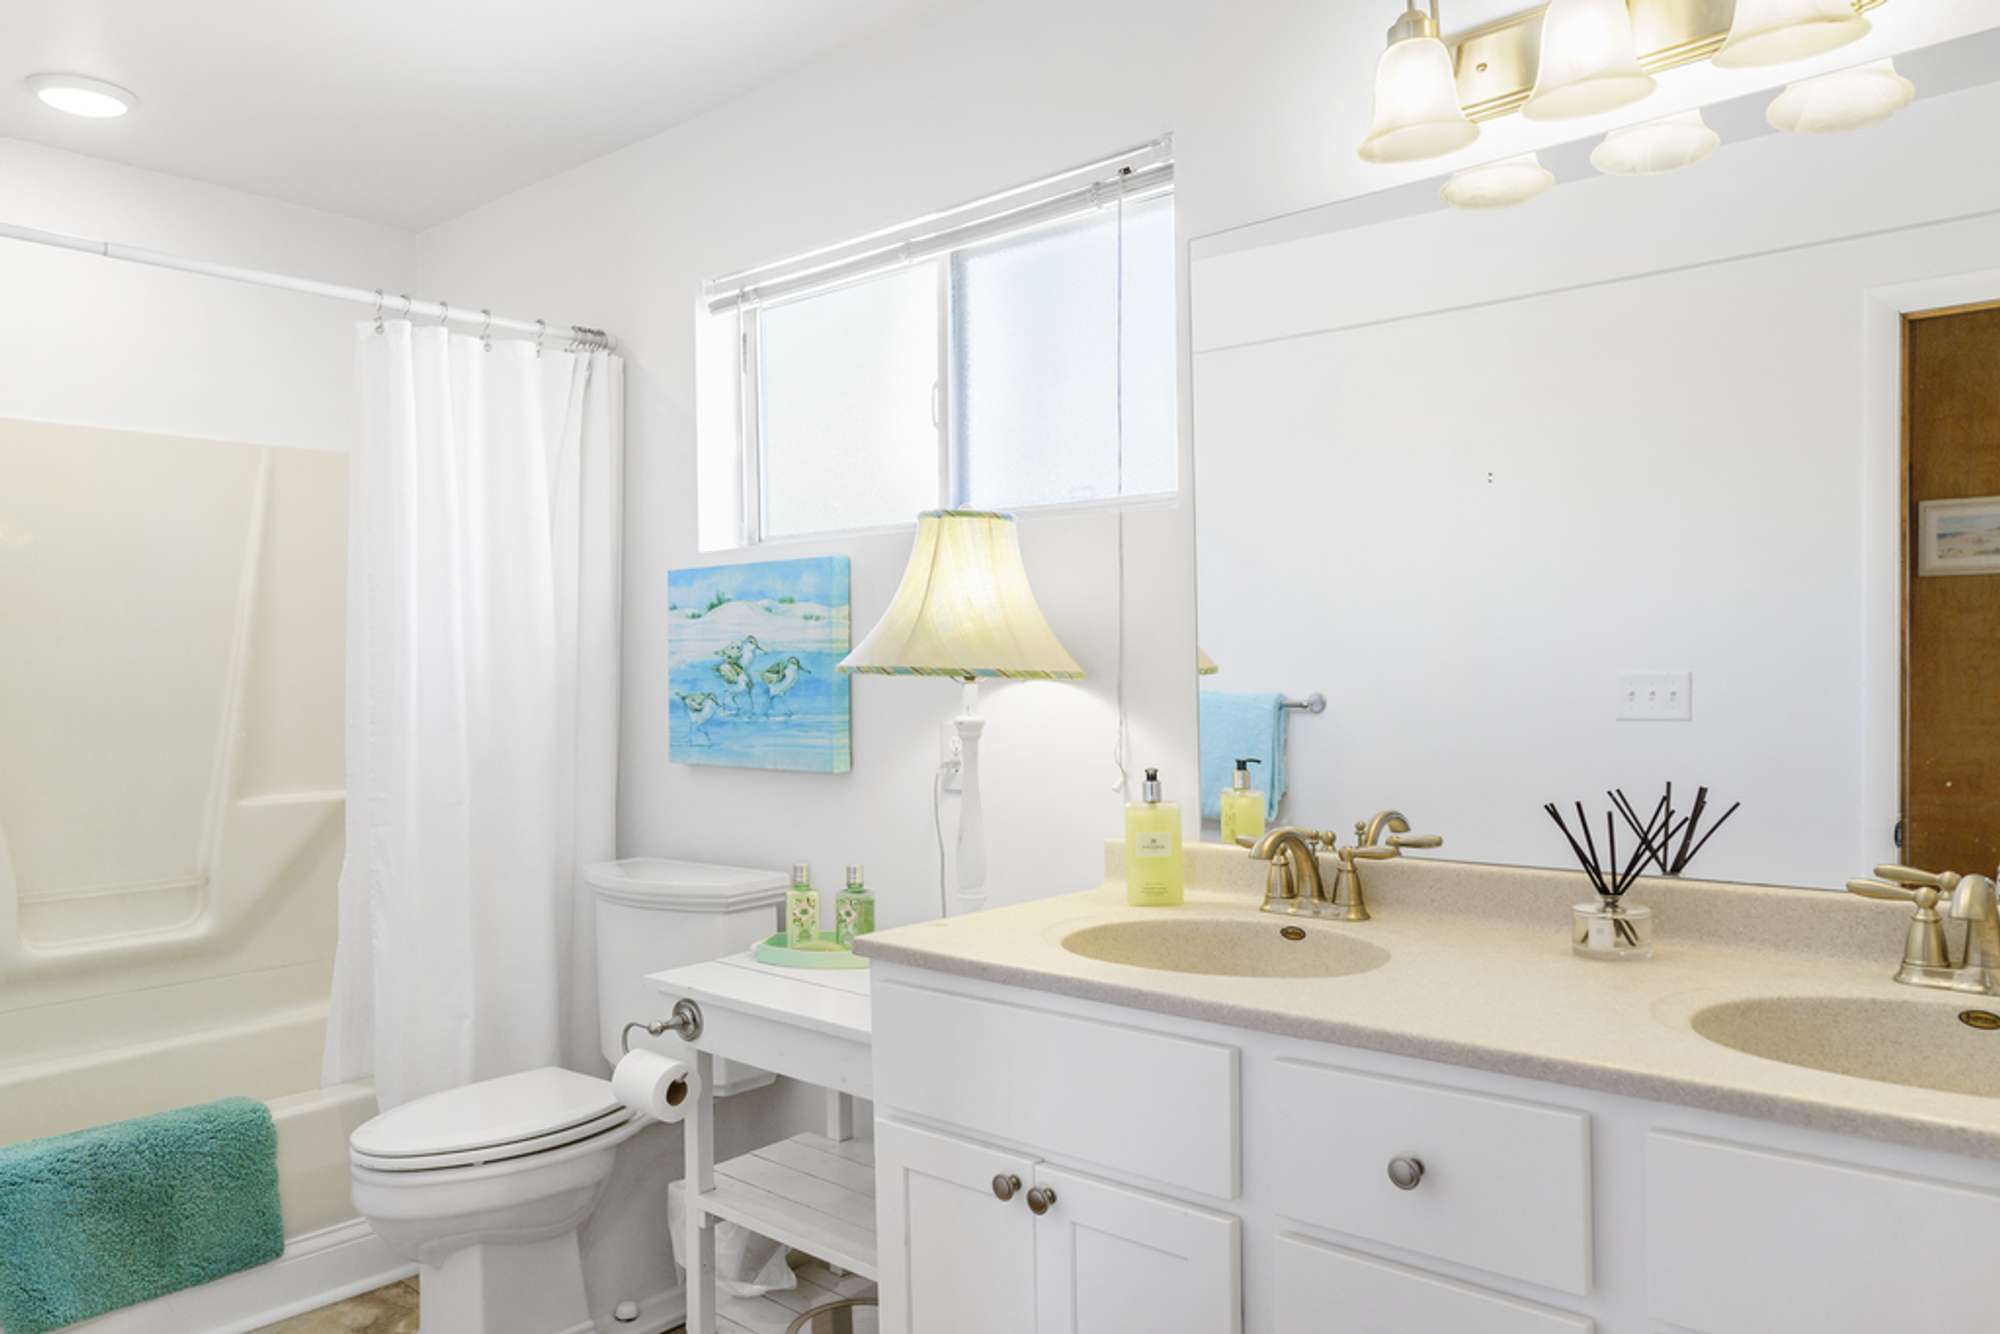 A spacious bathroom designed to comfortably host up to five guests.